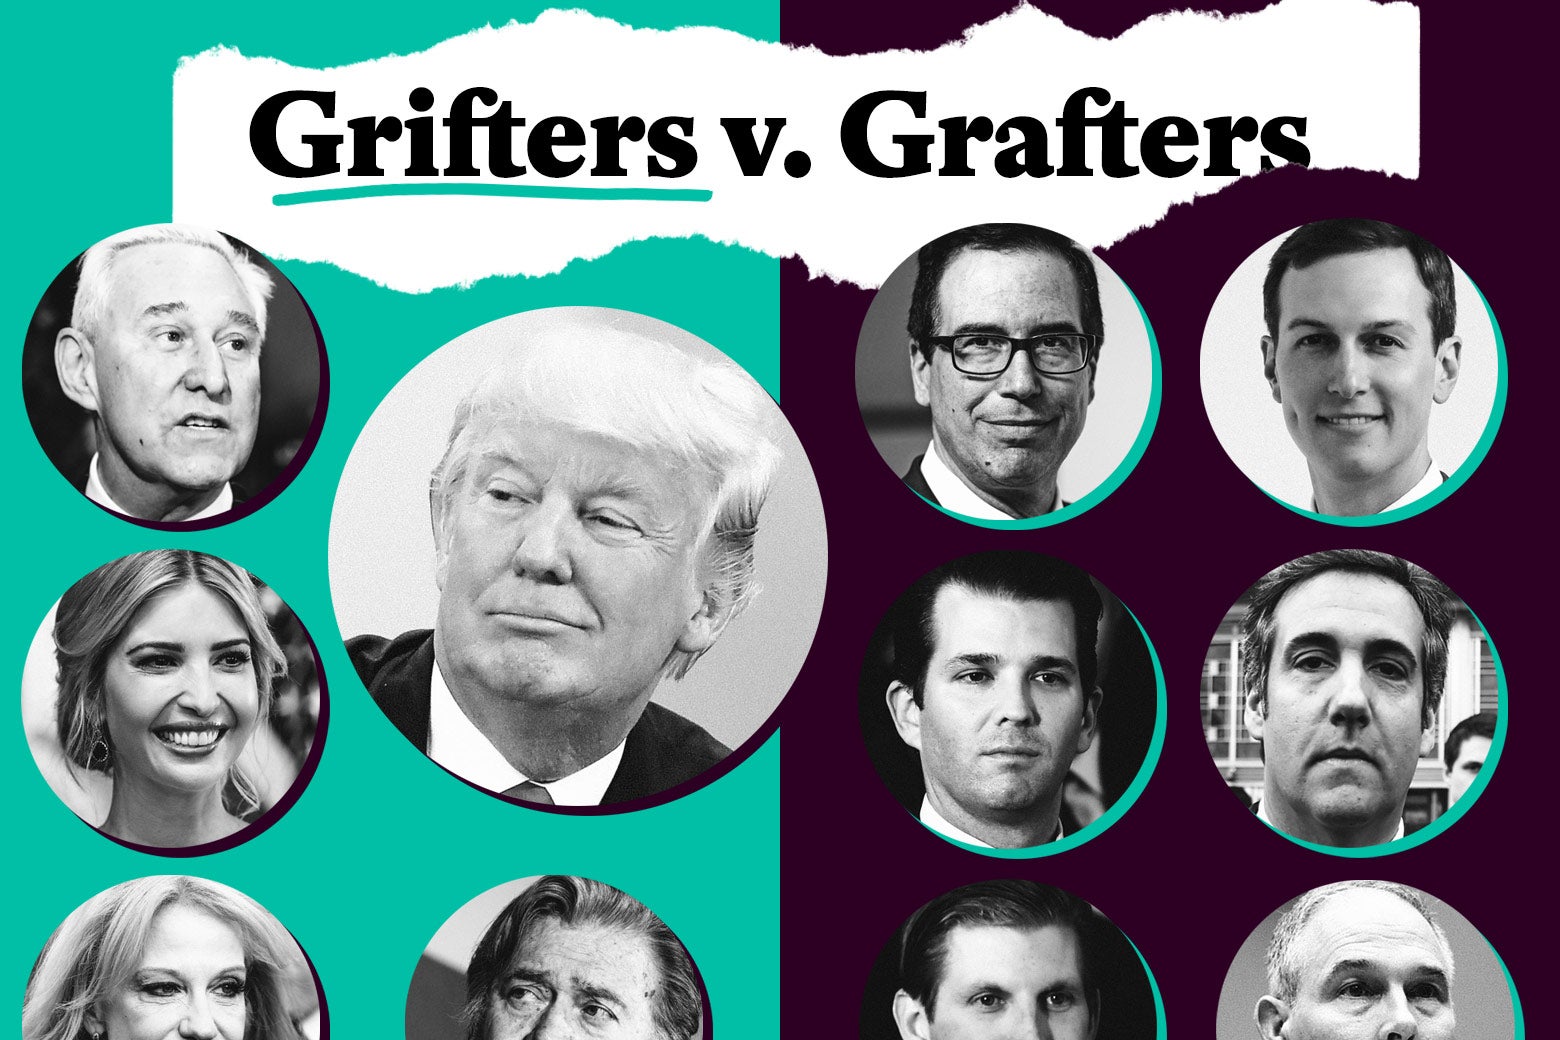 Chart showing grifters (Donald Trump, Ivanka Trump, Kellyanne Conway, Roger Stone, and Steve Bannon) on one side and grafters (Jared Kushner, Donald Trump, Jr., Eric Trump, Michael Cohen, Scott Pruitt, and Steve Mnuchin) on the other.